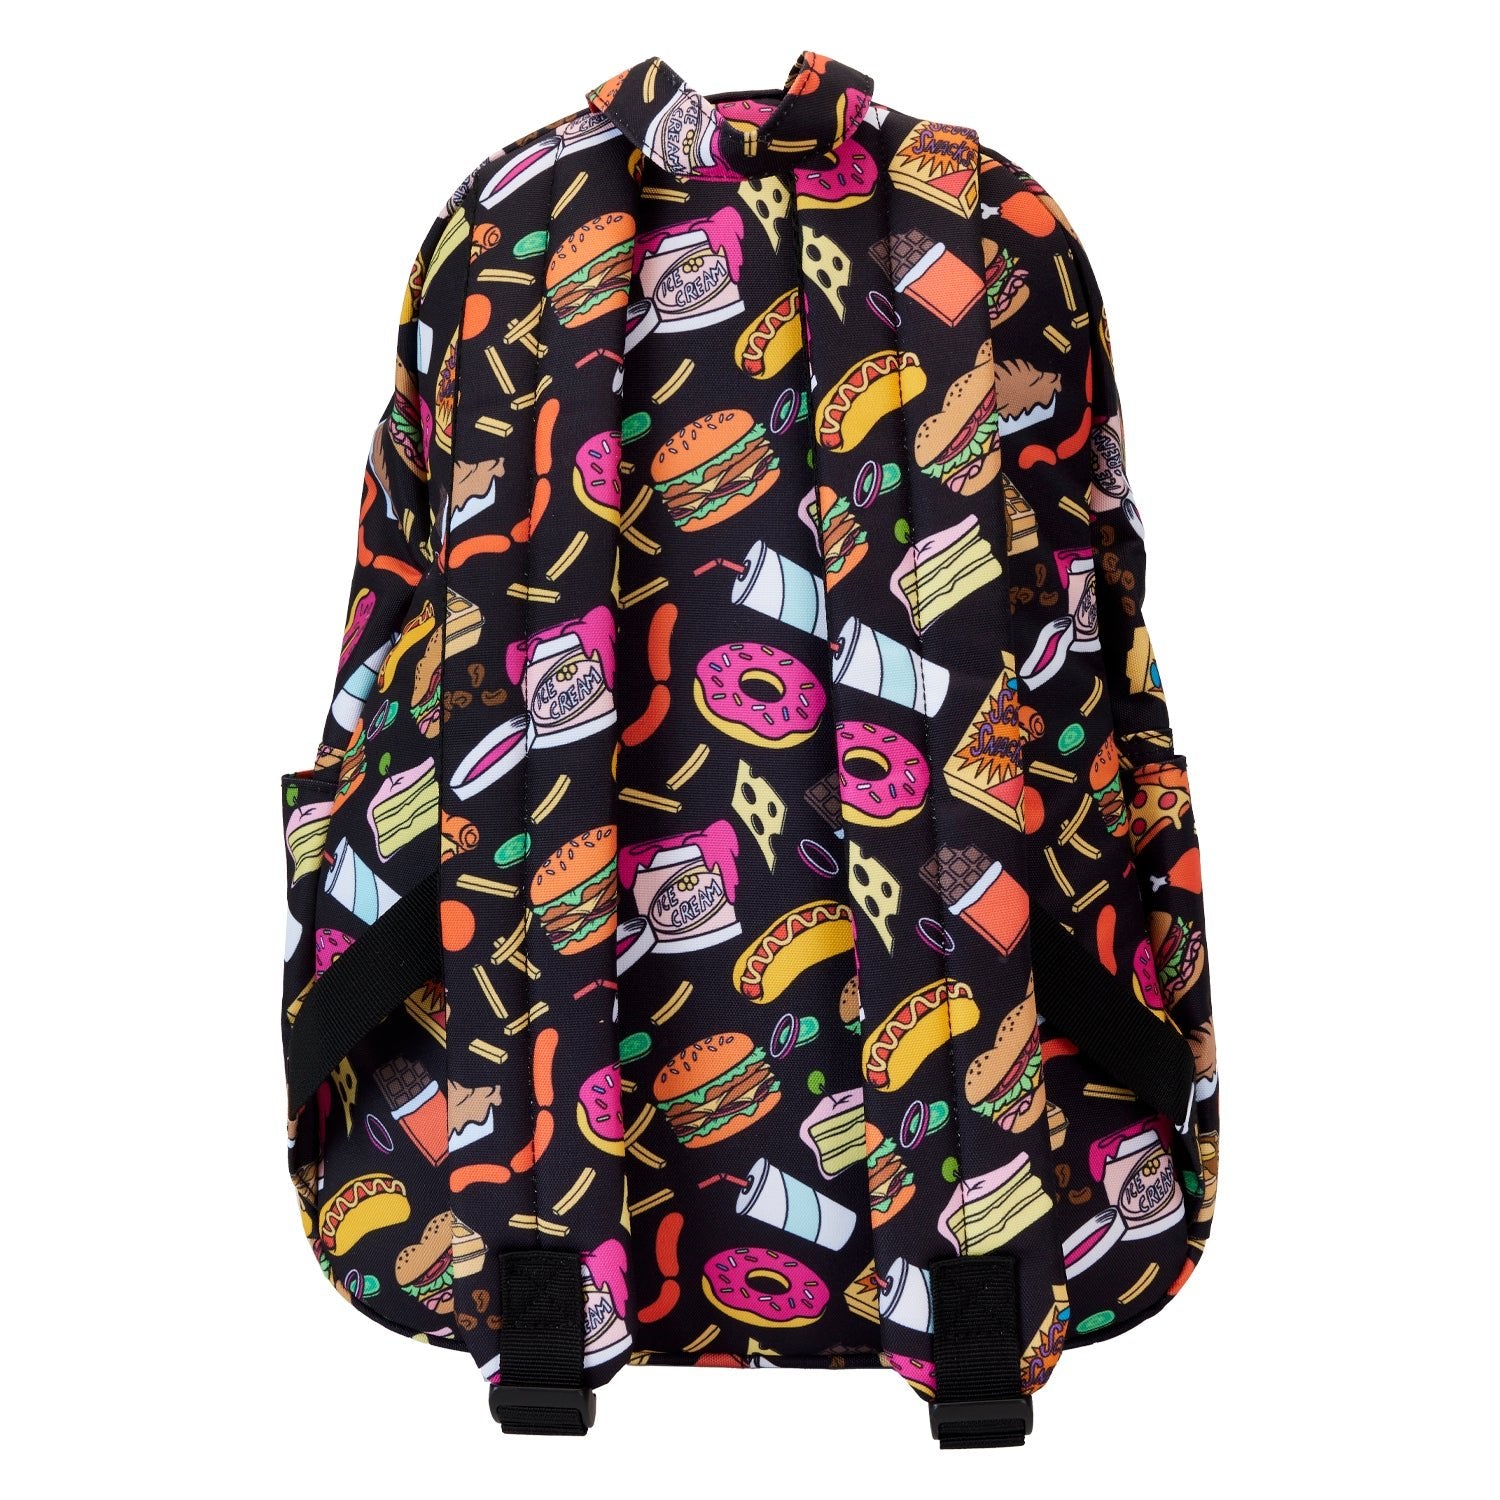 Loungefly x Scooby Doo Munchies AOP Full Size Nylon Backpack - GeekCore